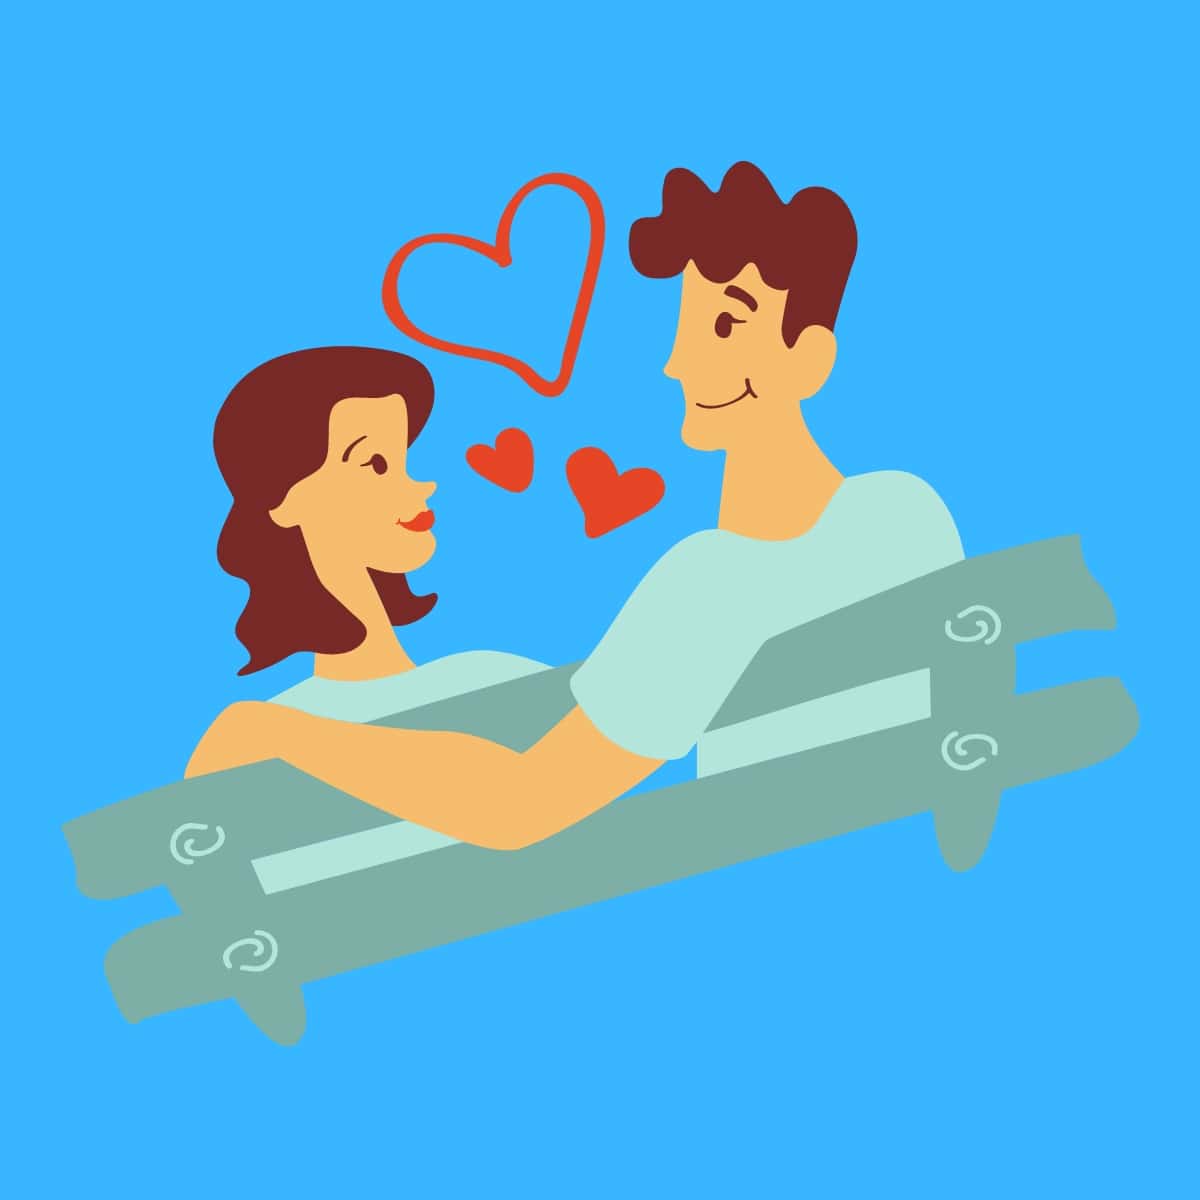 A cartoon graphic of a boyfriends with his arm around his girlfriend on a bench seat on a blue background.